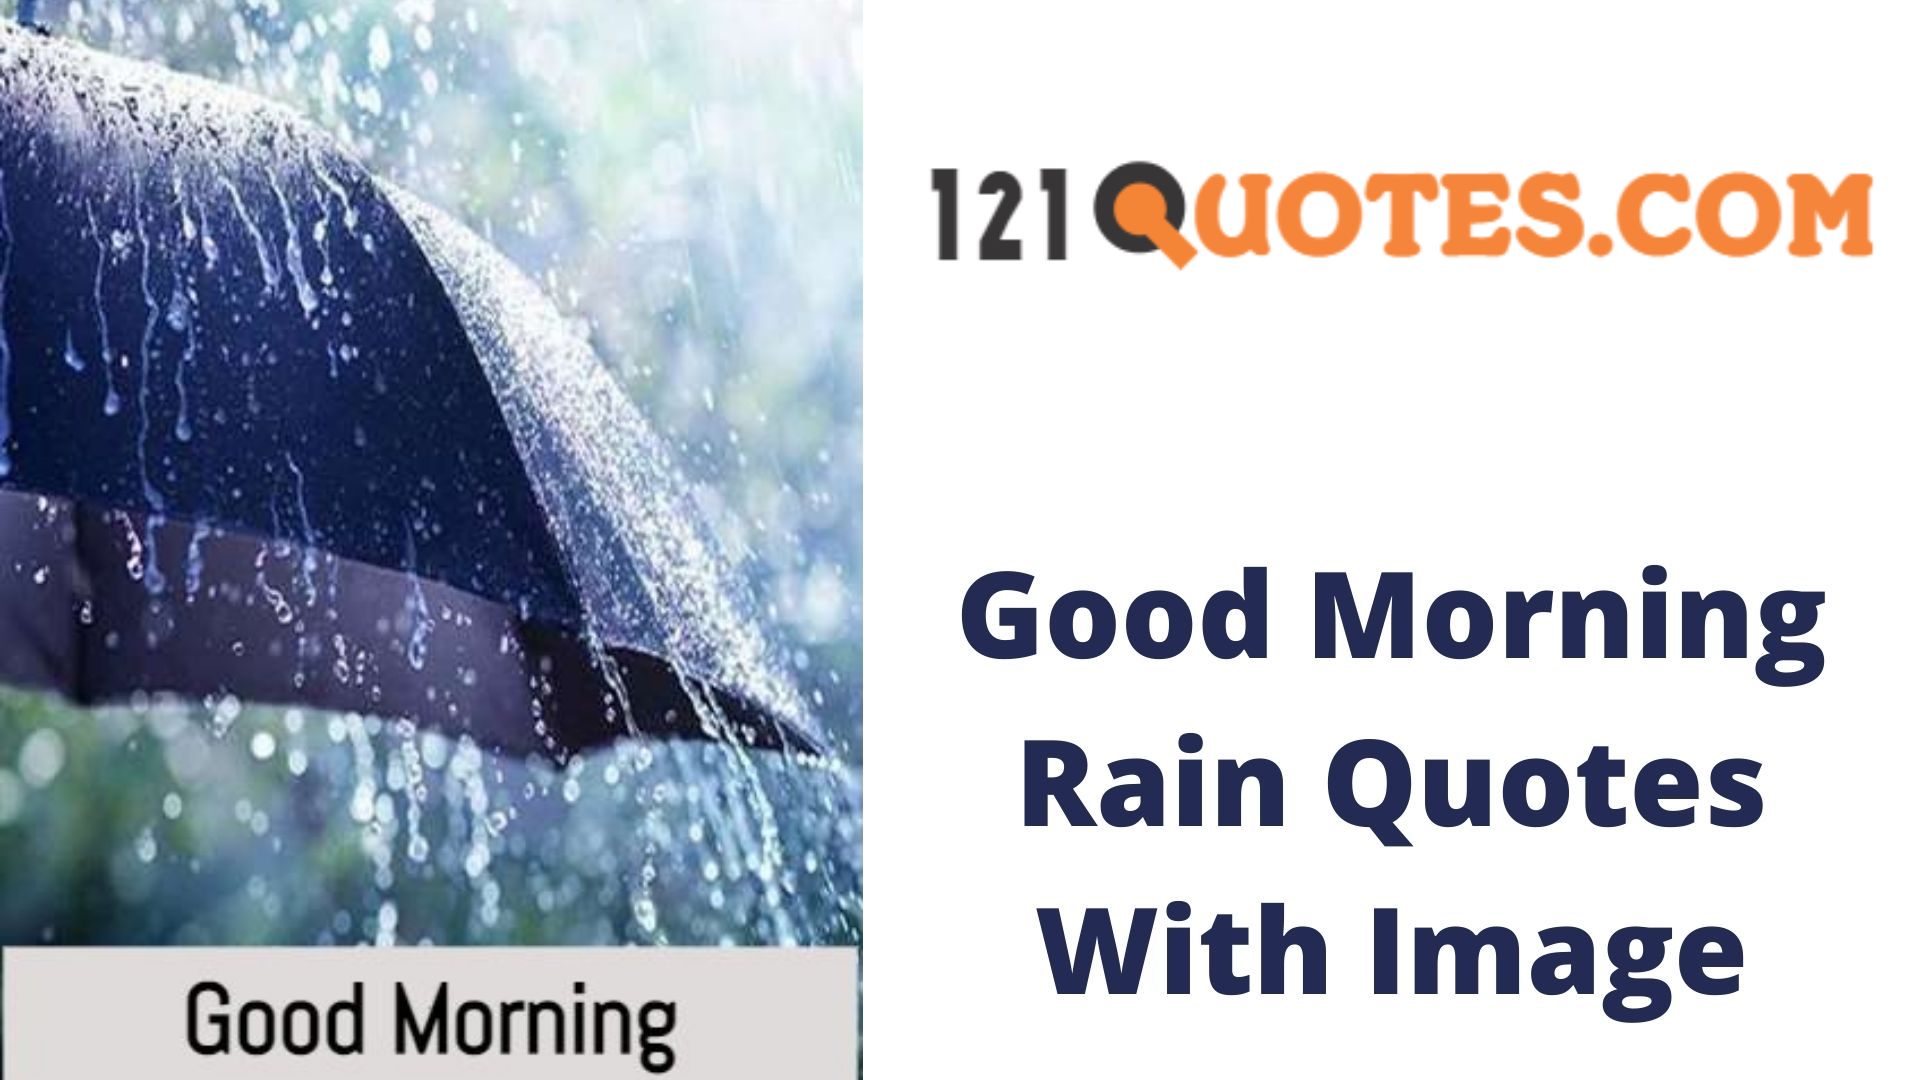 Rain best present. Quotes about Rainy Days. Save up for a Rainy Day идиома. Save for a Rainy Day idiom. To feel under the weather to save up for a Rainy Day.